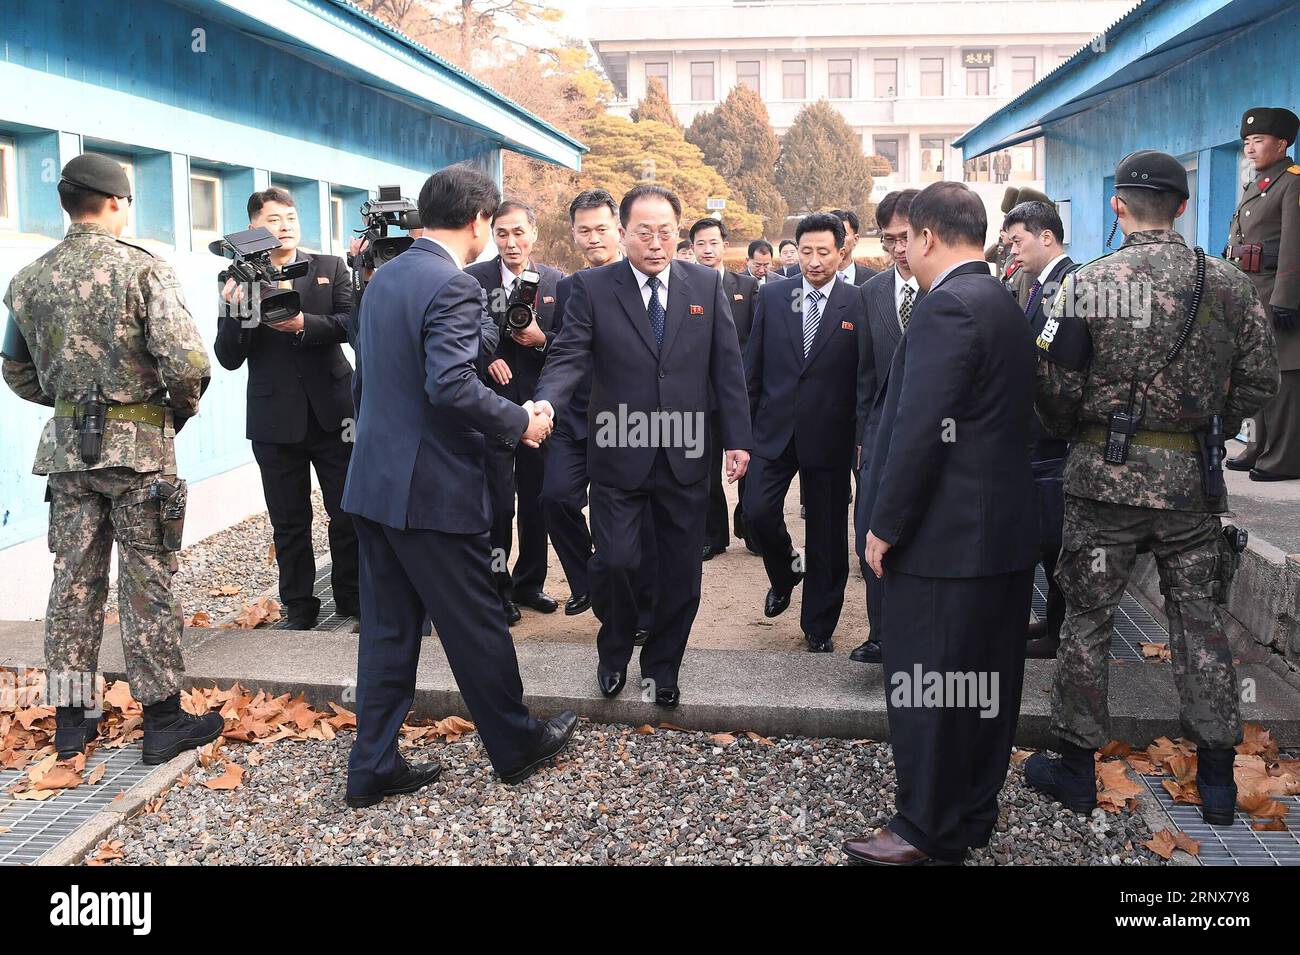 (180117) -- SEOUL, Jan. 17, 2018 () -- Jon Jong Su(C), vice chairman of the Committee for the Peaceful Reunification of the Fatherland of the Democratic People s Republic of Korea (DPRK), arrives for talks at the truce village of Panmunjom, Jan. 17, 2018. Working-level talks between South Korea and DPRK were underway Wednesday at the truce village of Panmunjom to discuss the DPRK s dispatch of athletes to the South Korea-hosted Winter Olympics, Seoul s Unification Ministry said. (/South Korean Unification Ministry) (psw) SOUTH KOREA-DPRK-WINTER OLYMPICS-TALKS Xinhua PUBLICATIONxNOTxINxCHN Stock Photo